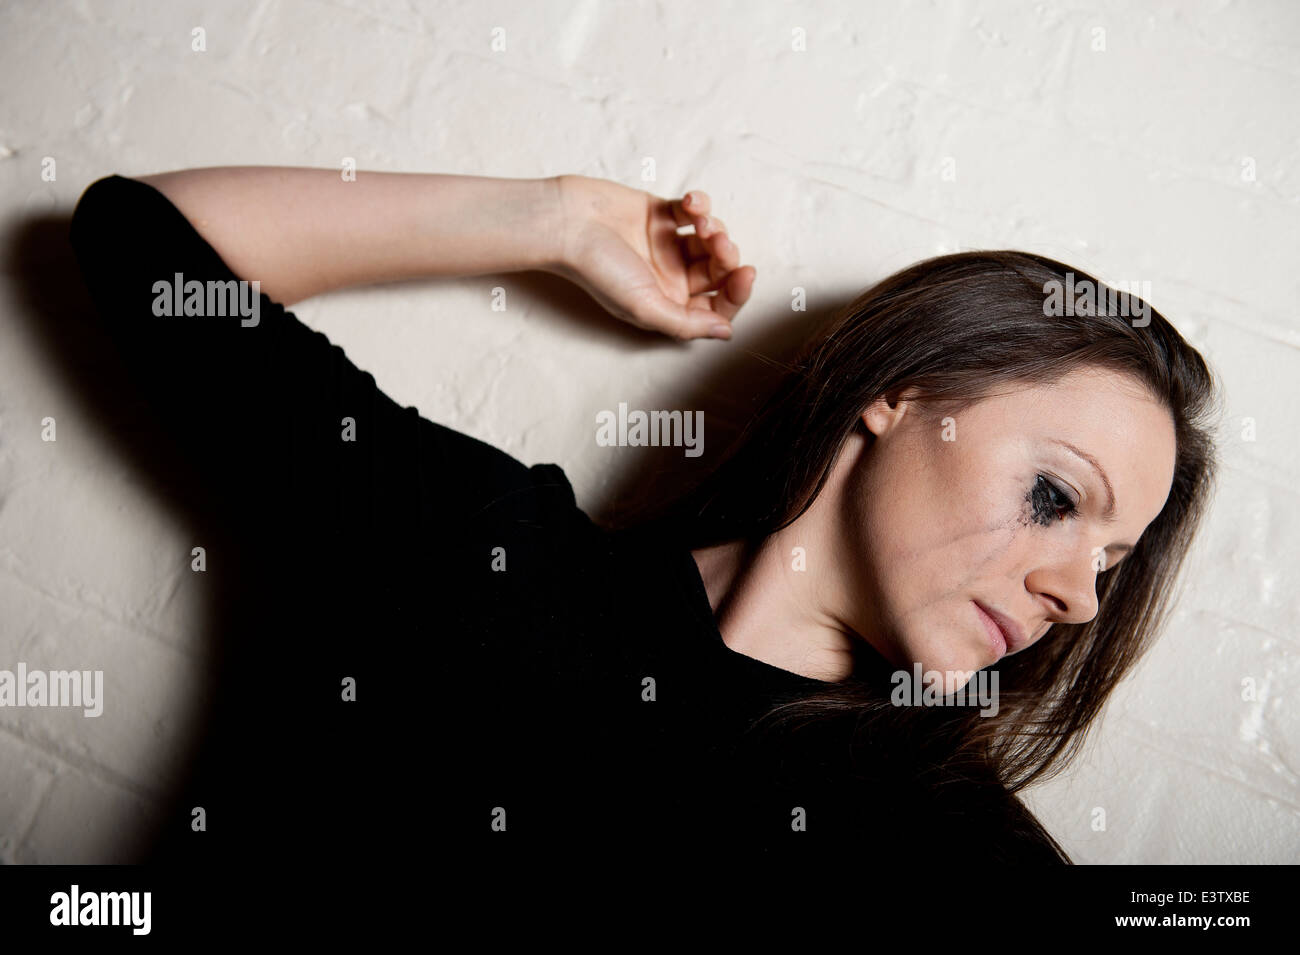 Tearful young woman with her make-up running down her face. Stock Photo